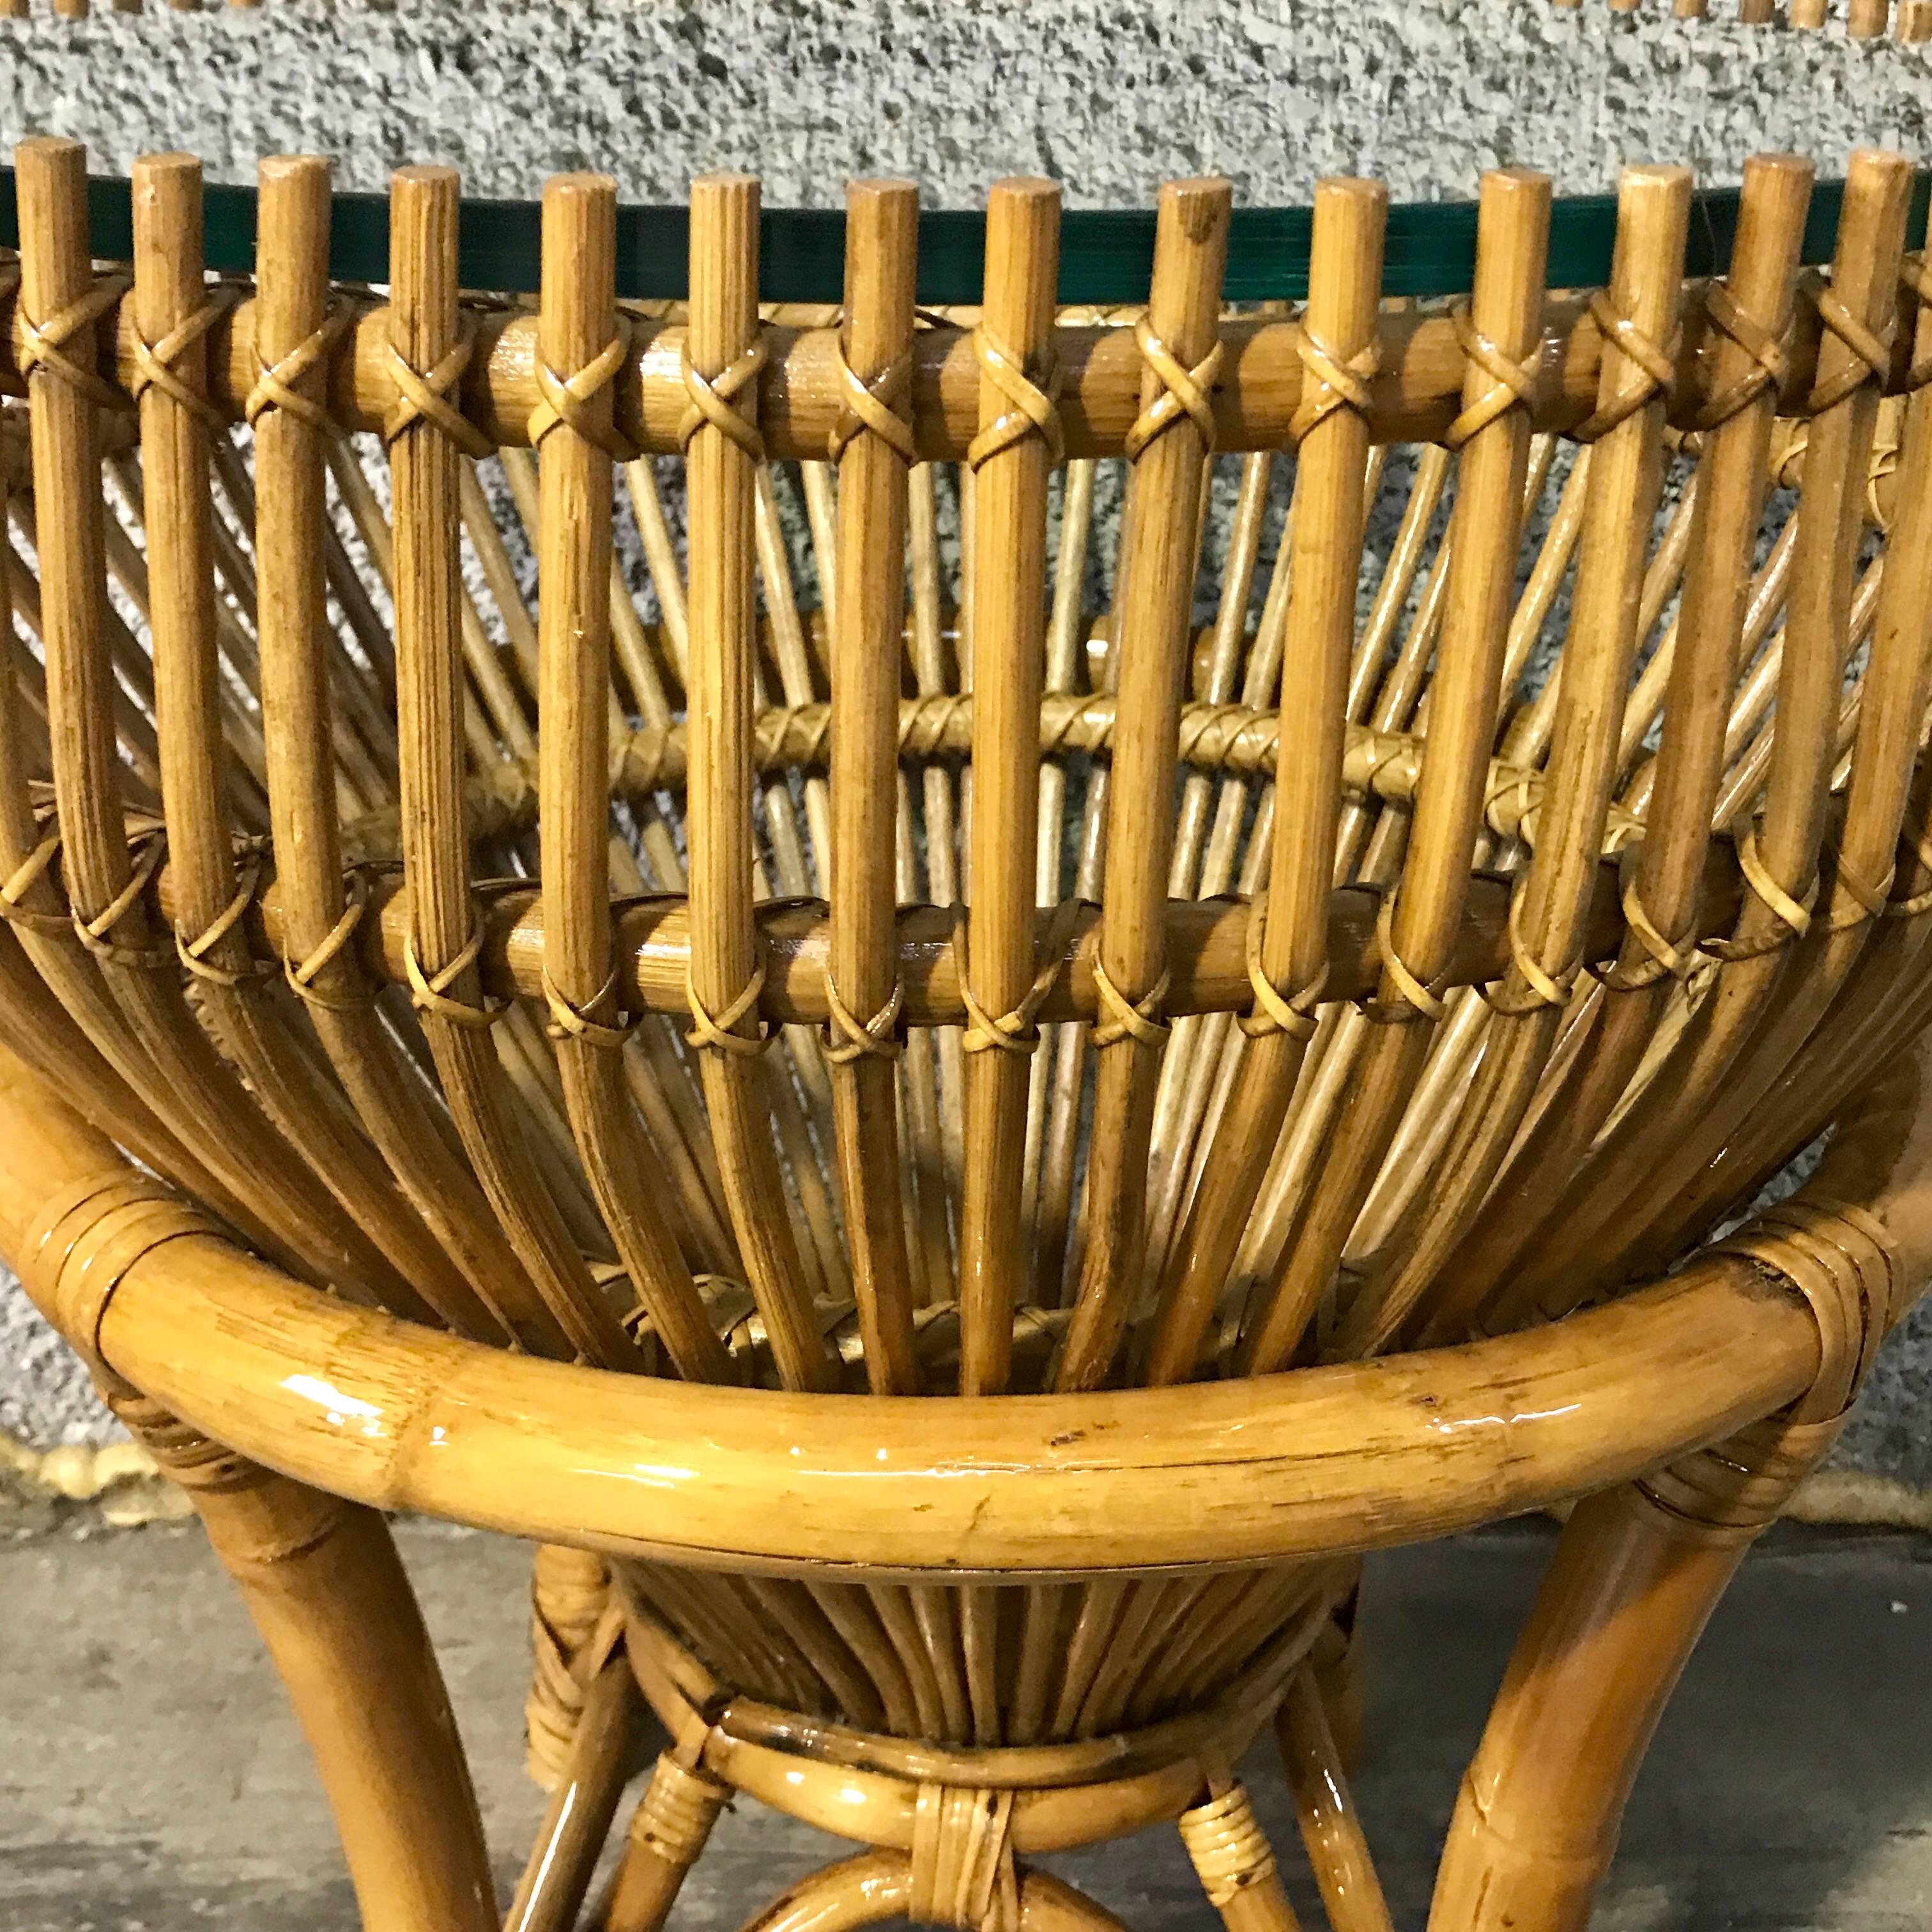 in the style of Franco Albini "Fish Trap" table, restored, beautifully made, with new 19.5" inset glass top, on the two-piece woven base. Professionally restored finish, no breaks. The top "Trap" measures 21" D x